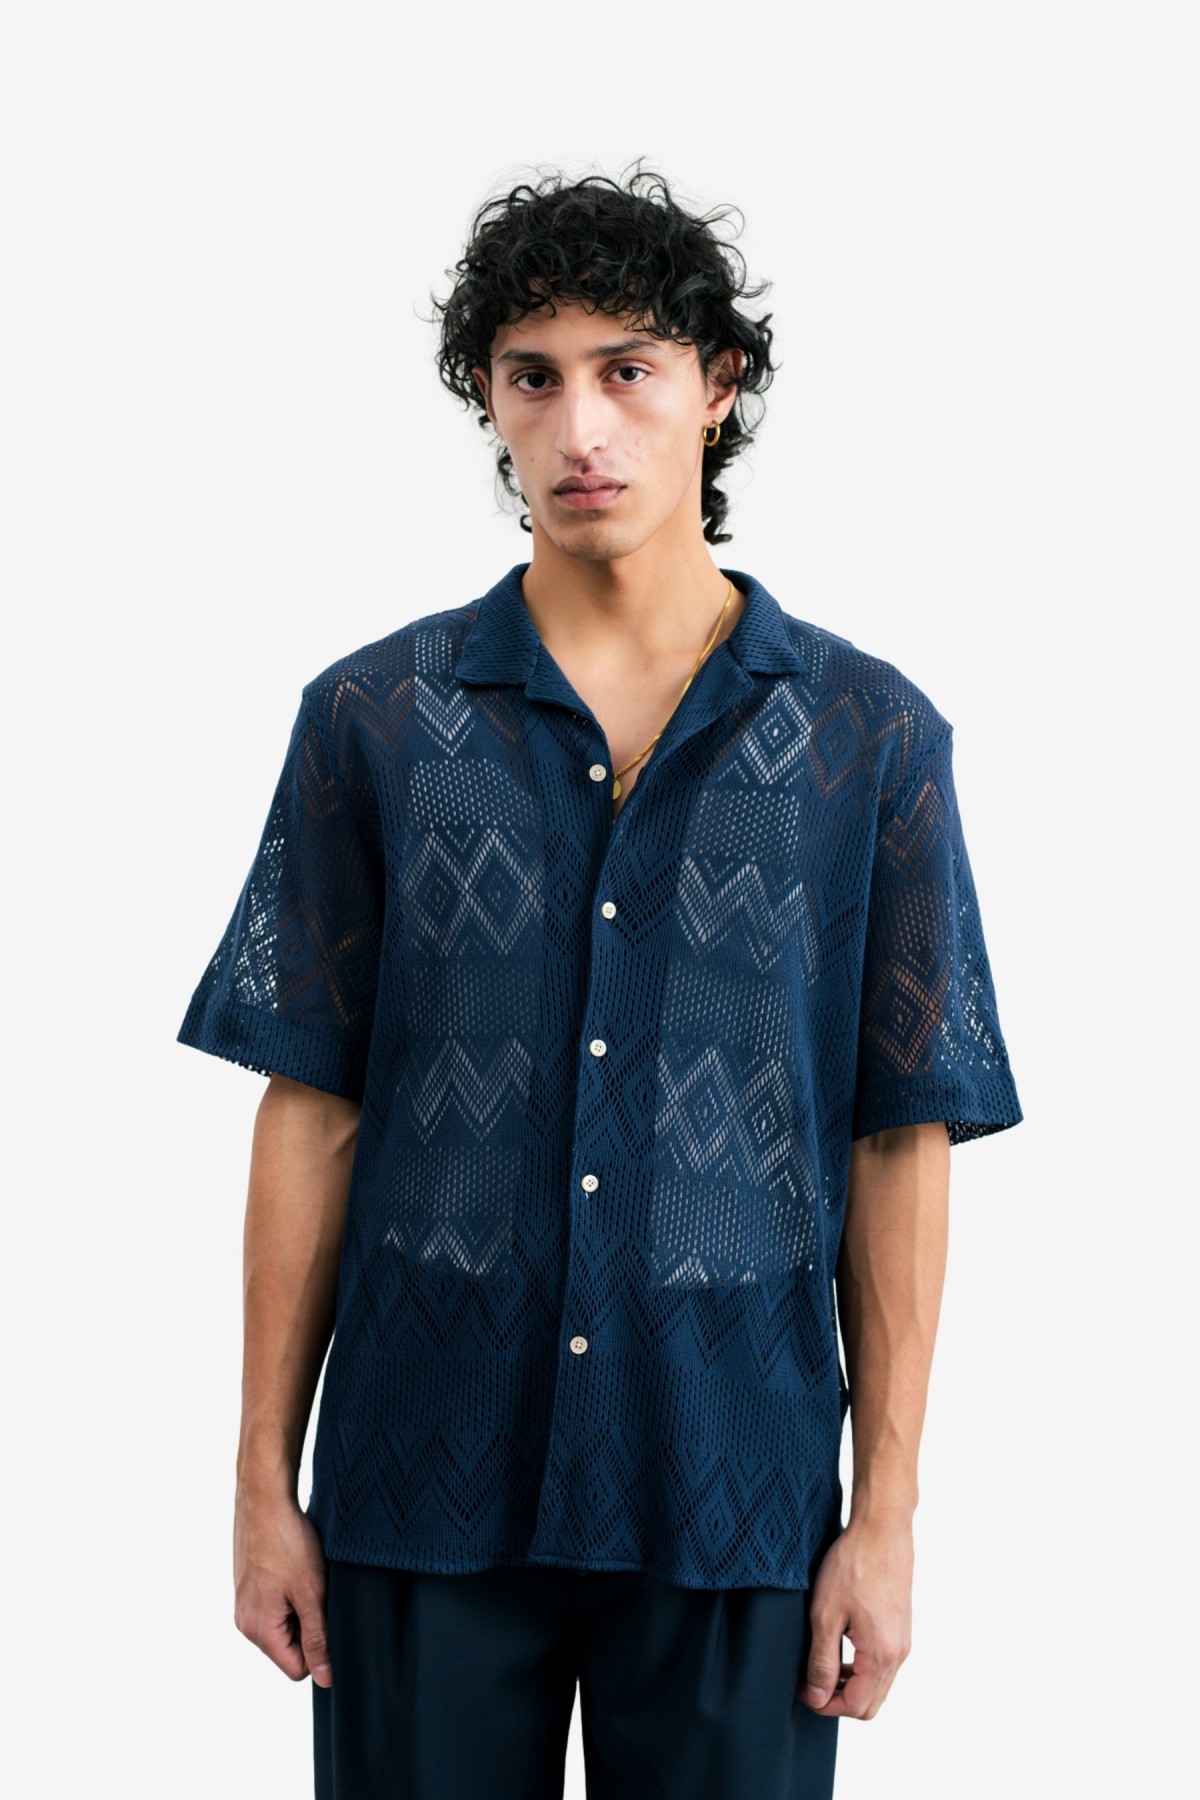 A Kind of Guise Gioia Shirt in Midnight Crochet